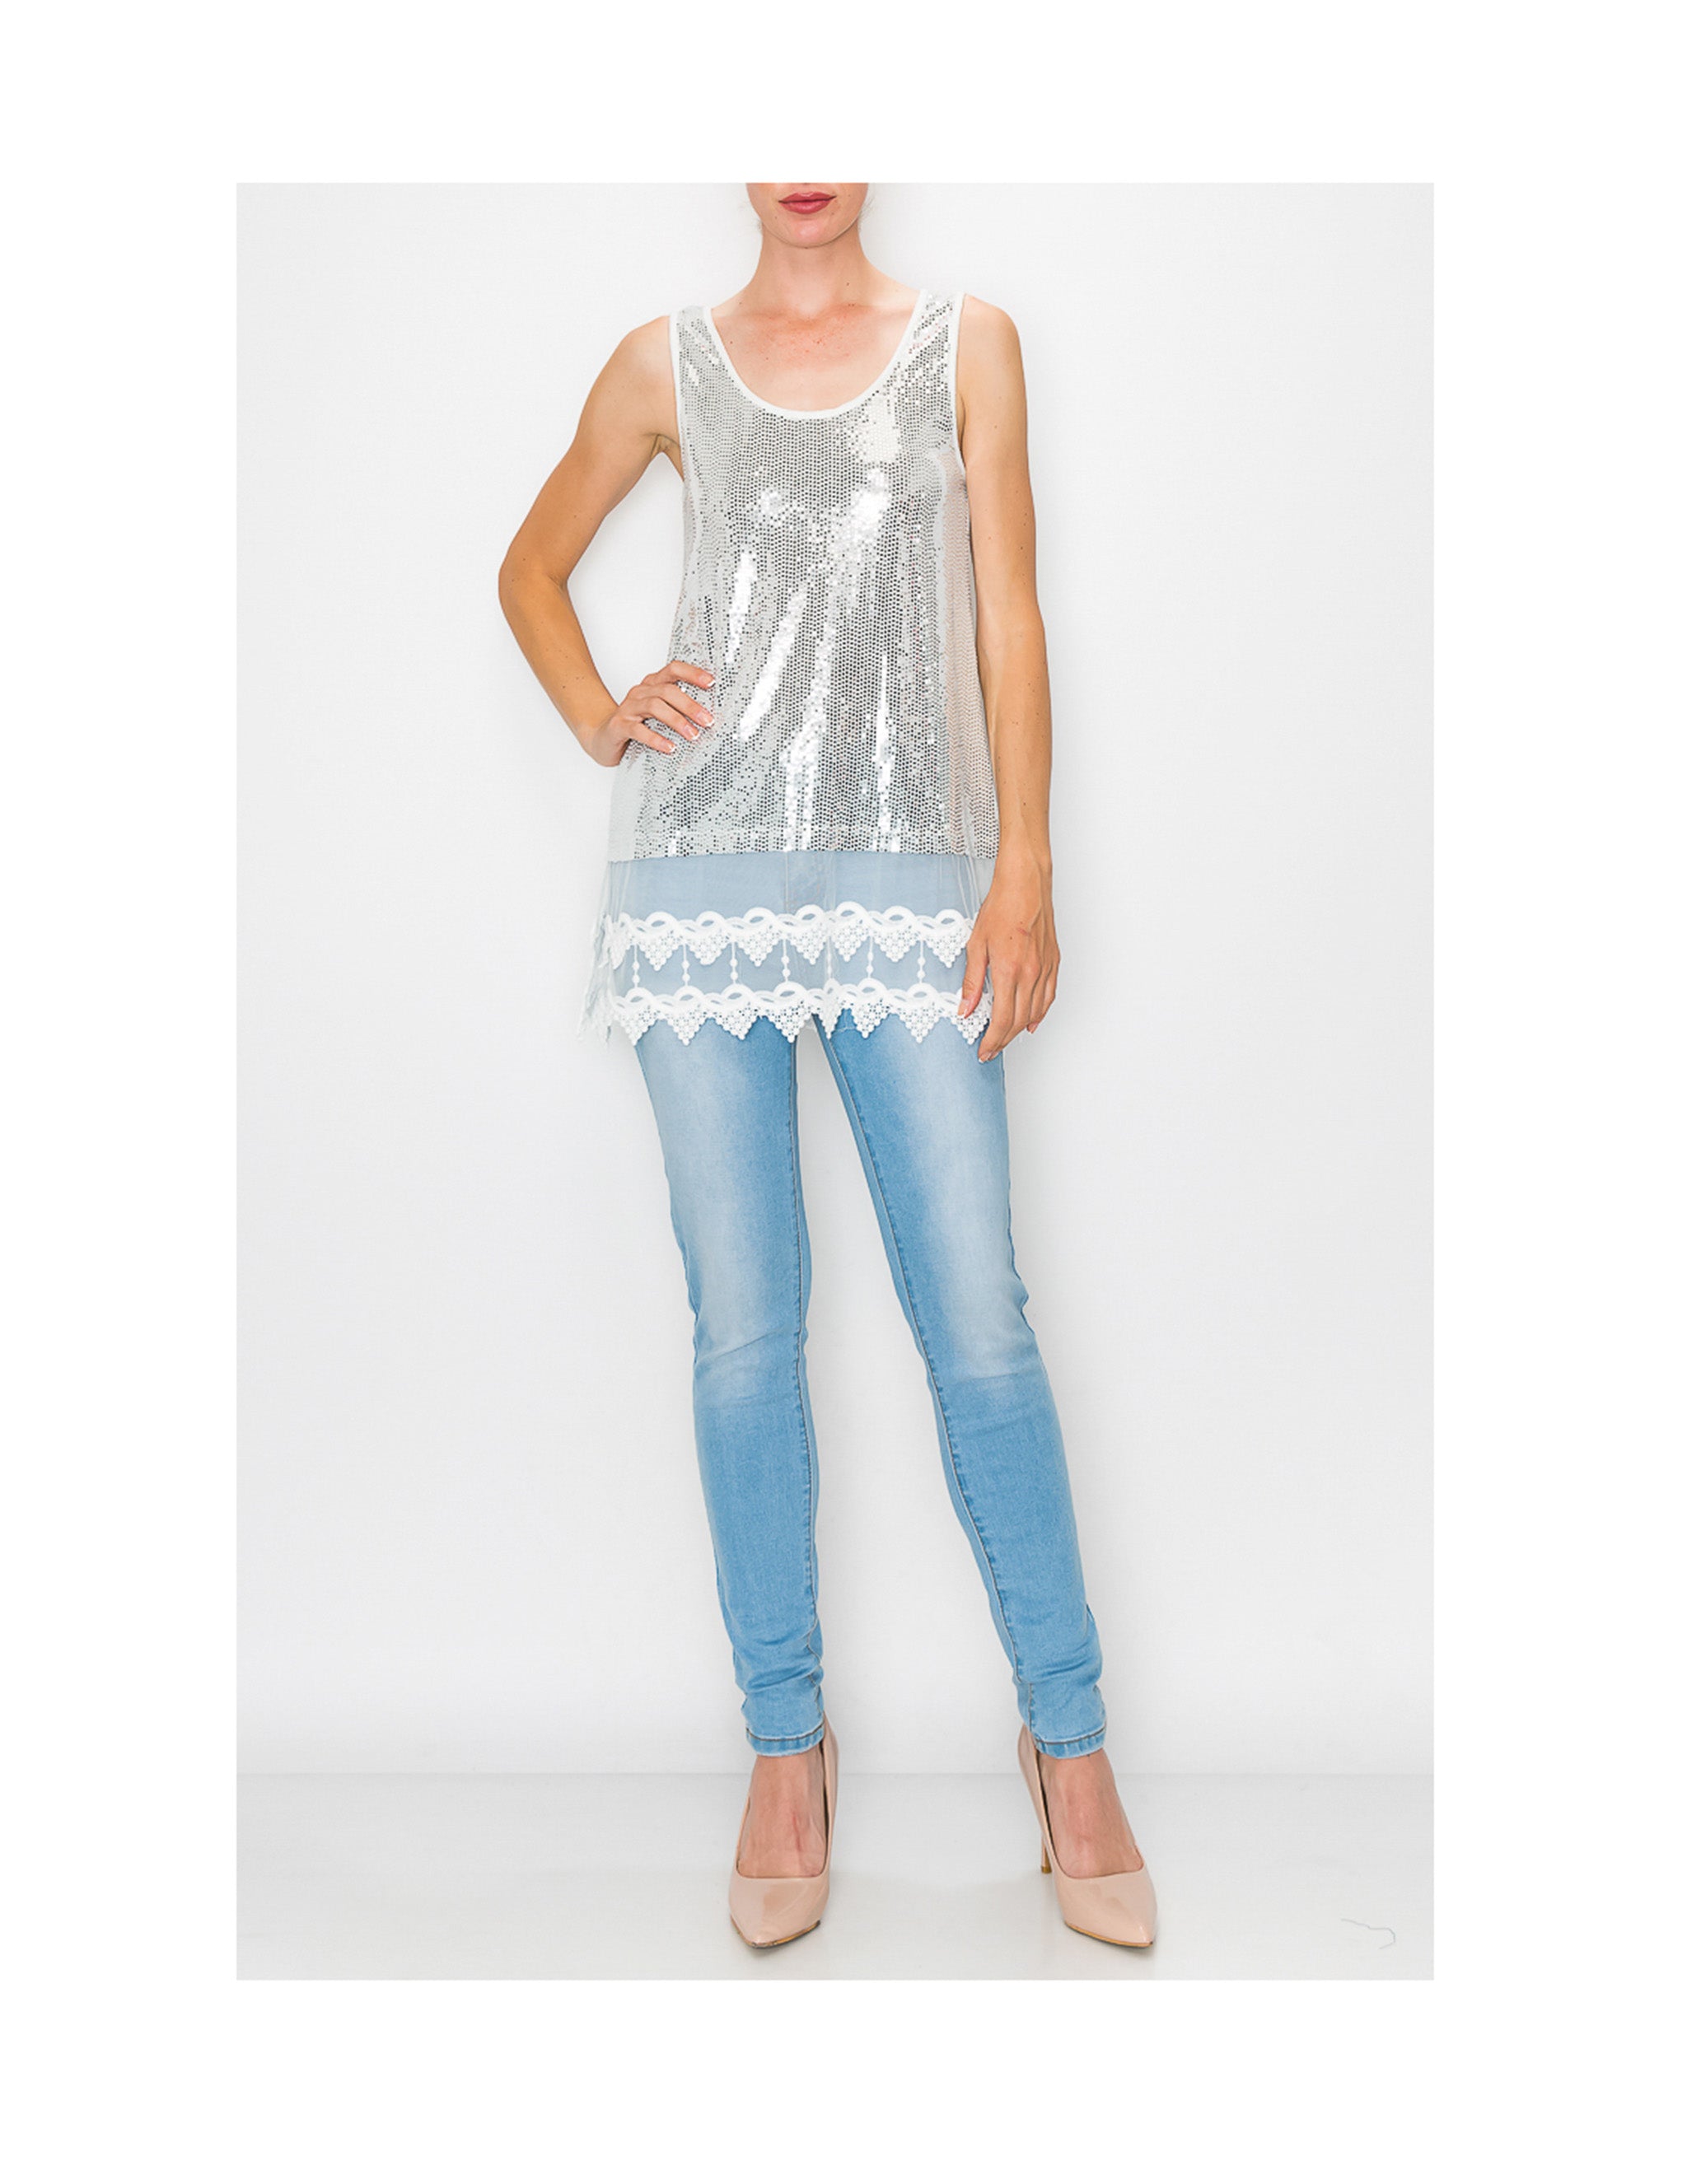 Silver Sparkly Tank